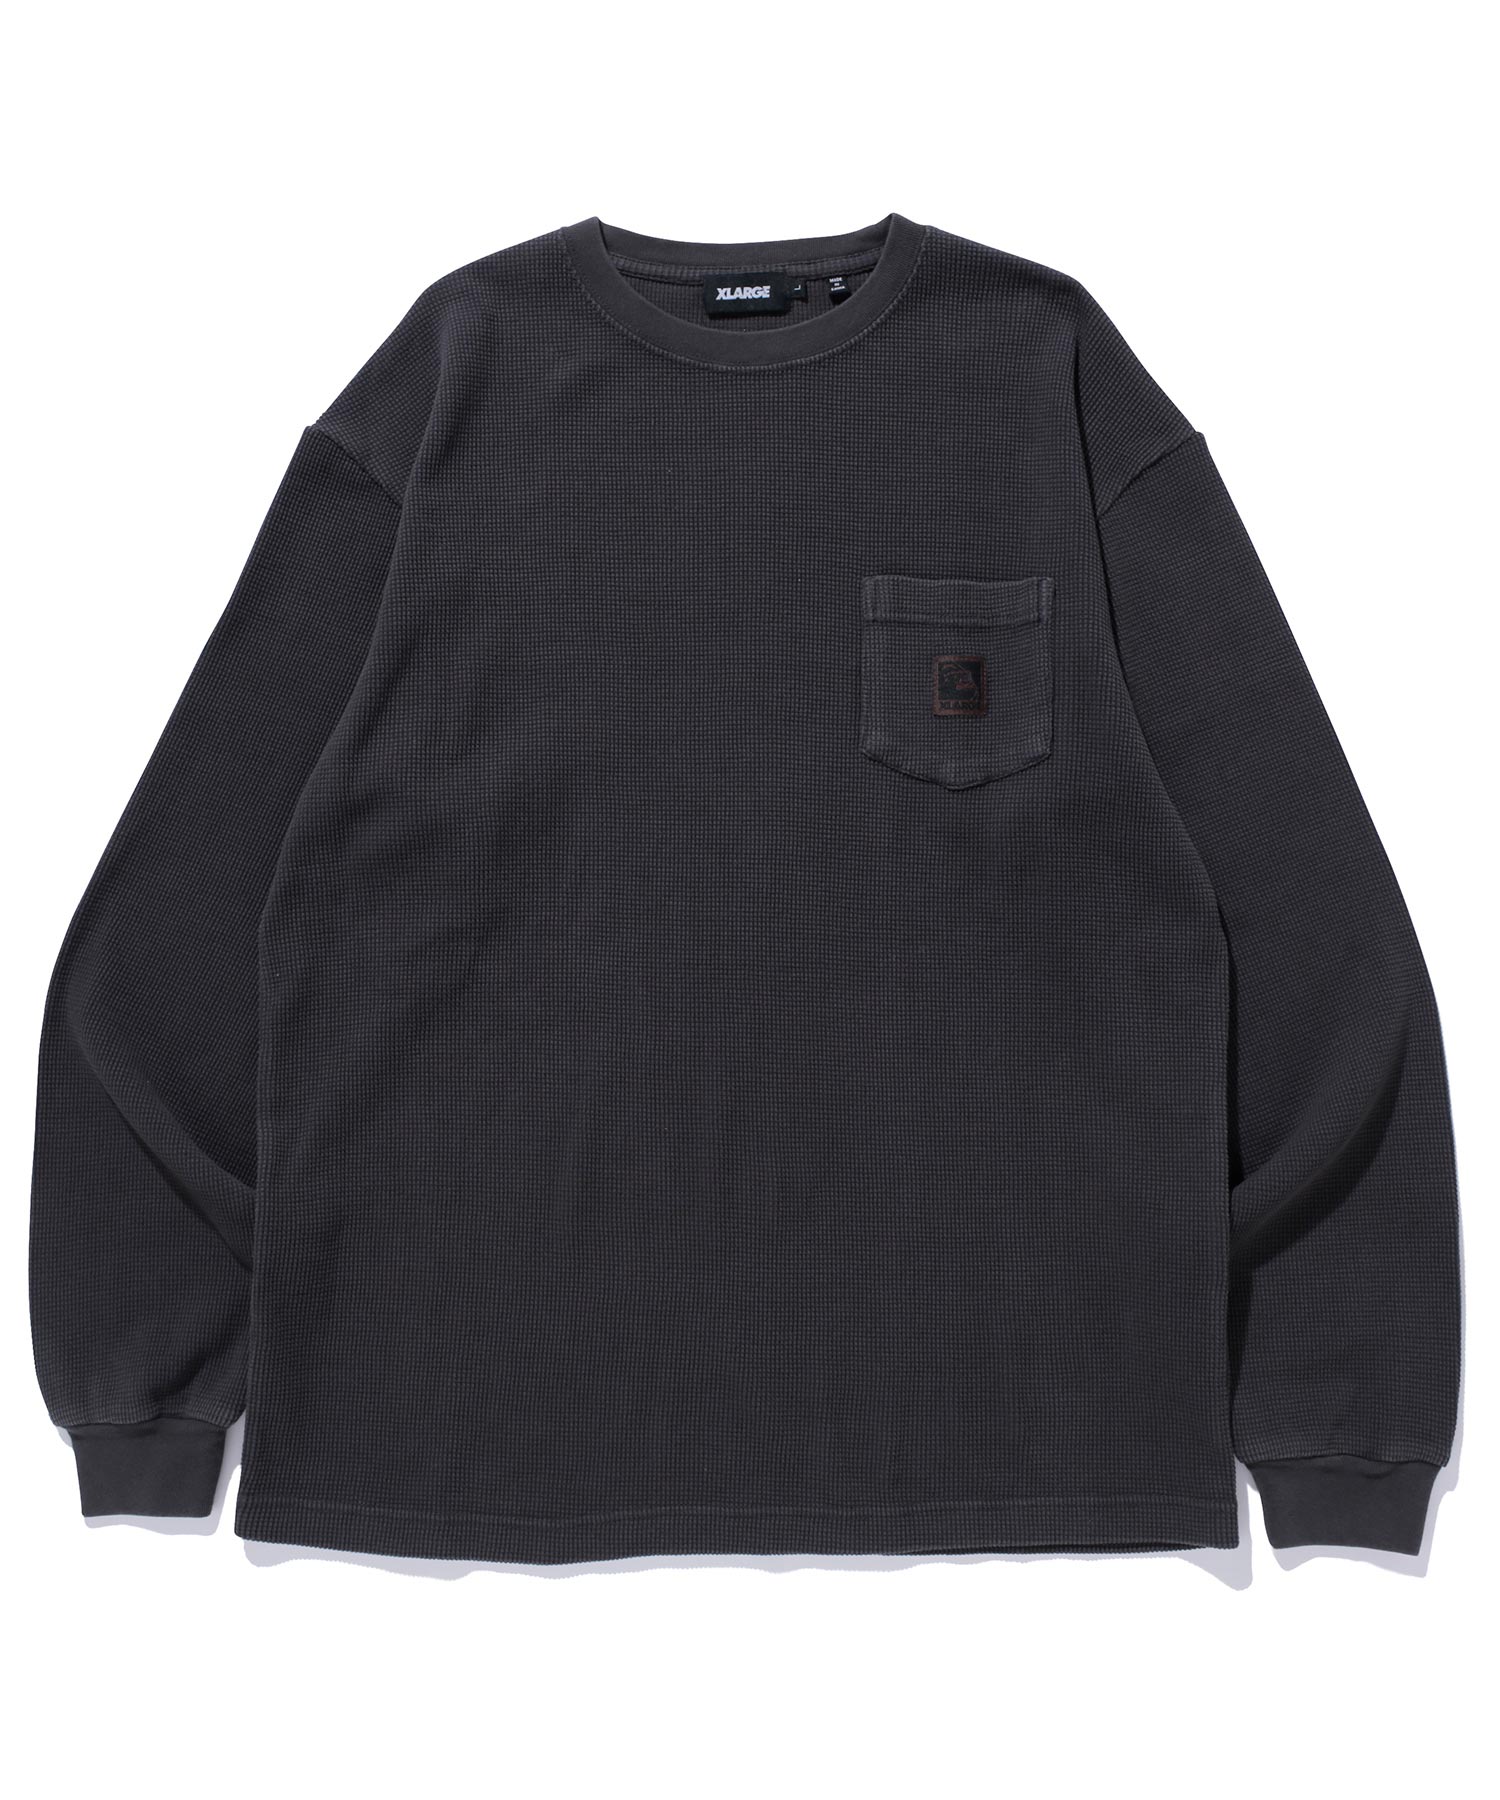 OVERDYED THERMAL L/S TEE